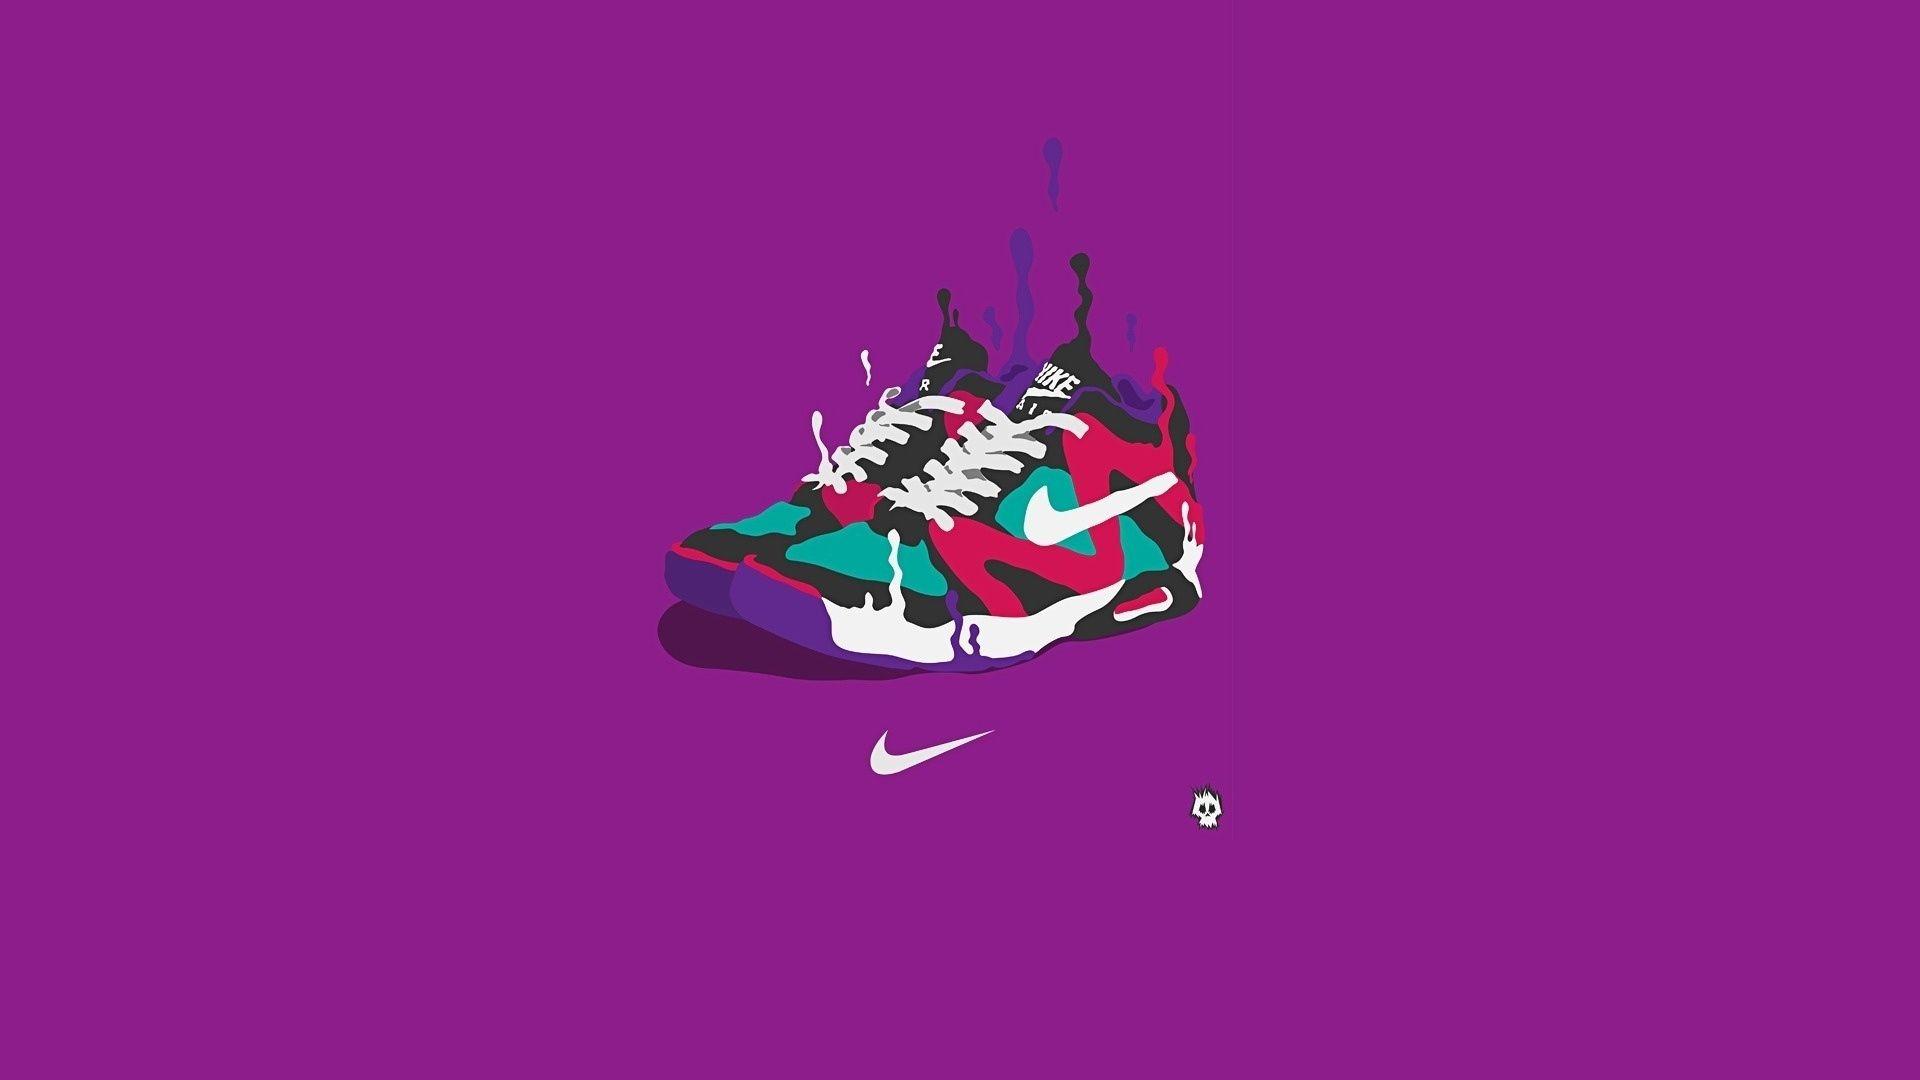 Download Wallpaper 1920x1080 nike, sneakers, brand, sports, firm